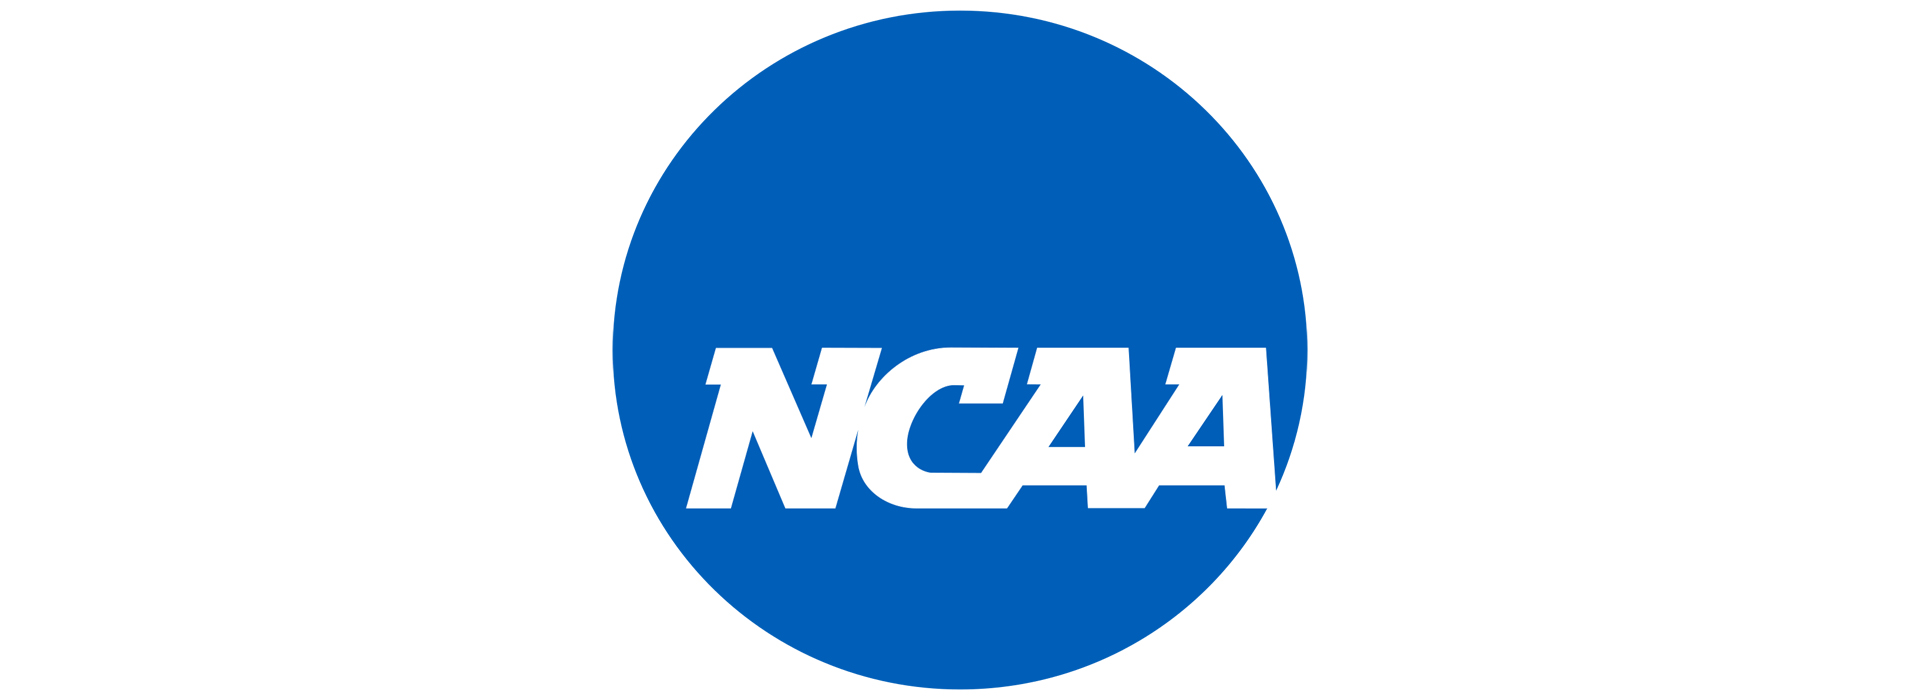 Tech student-athletes continue impressive marks in latest NCAA Graduation Success Rate report